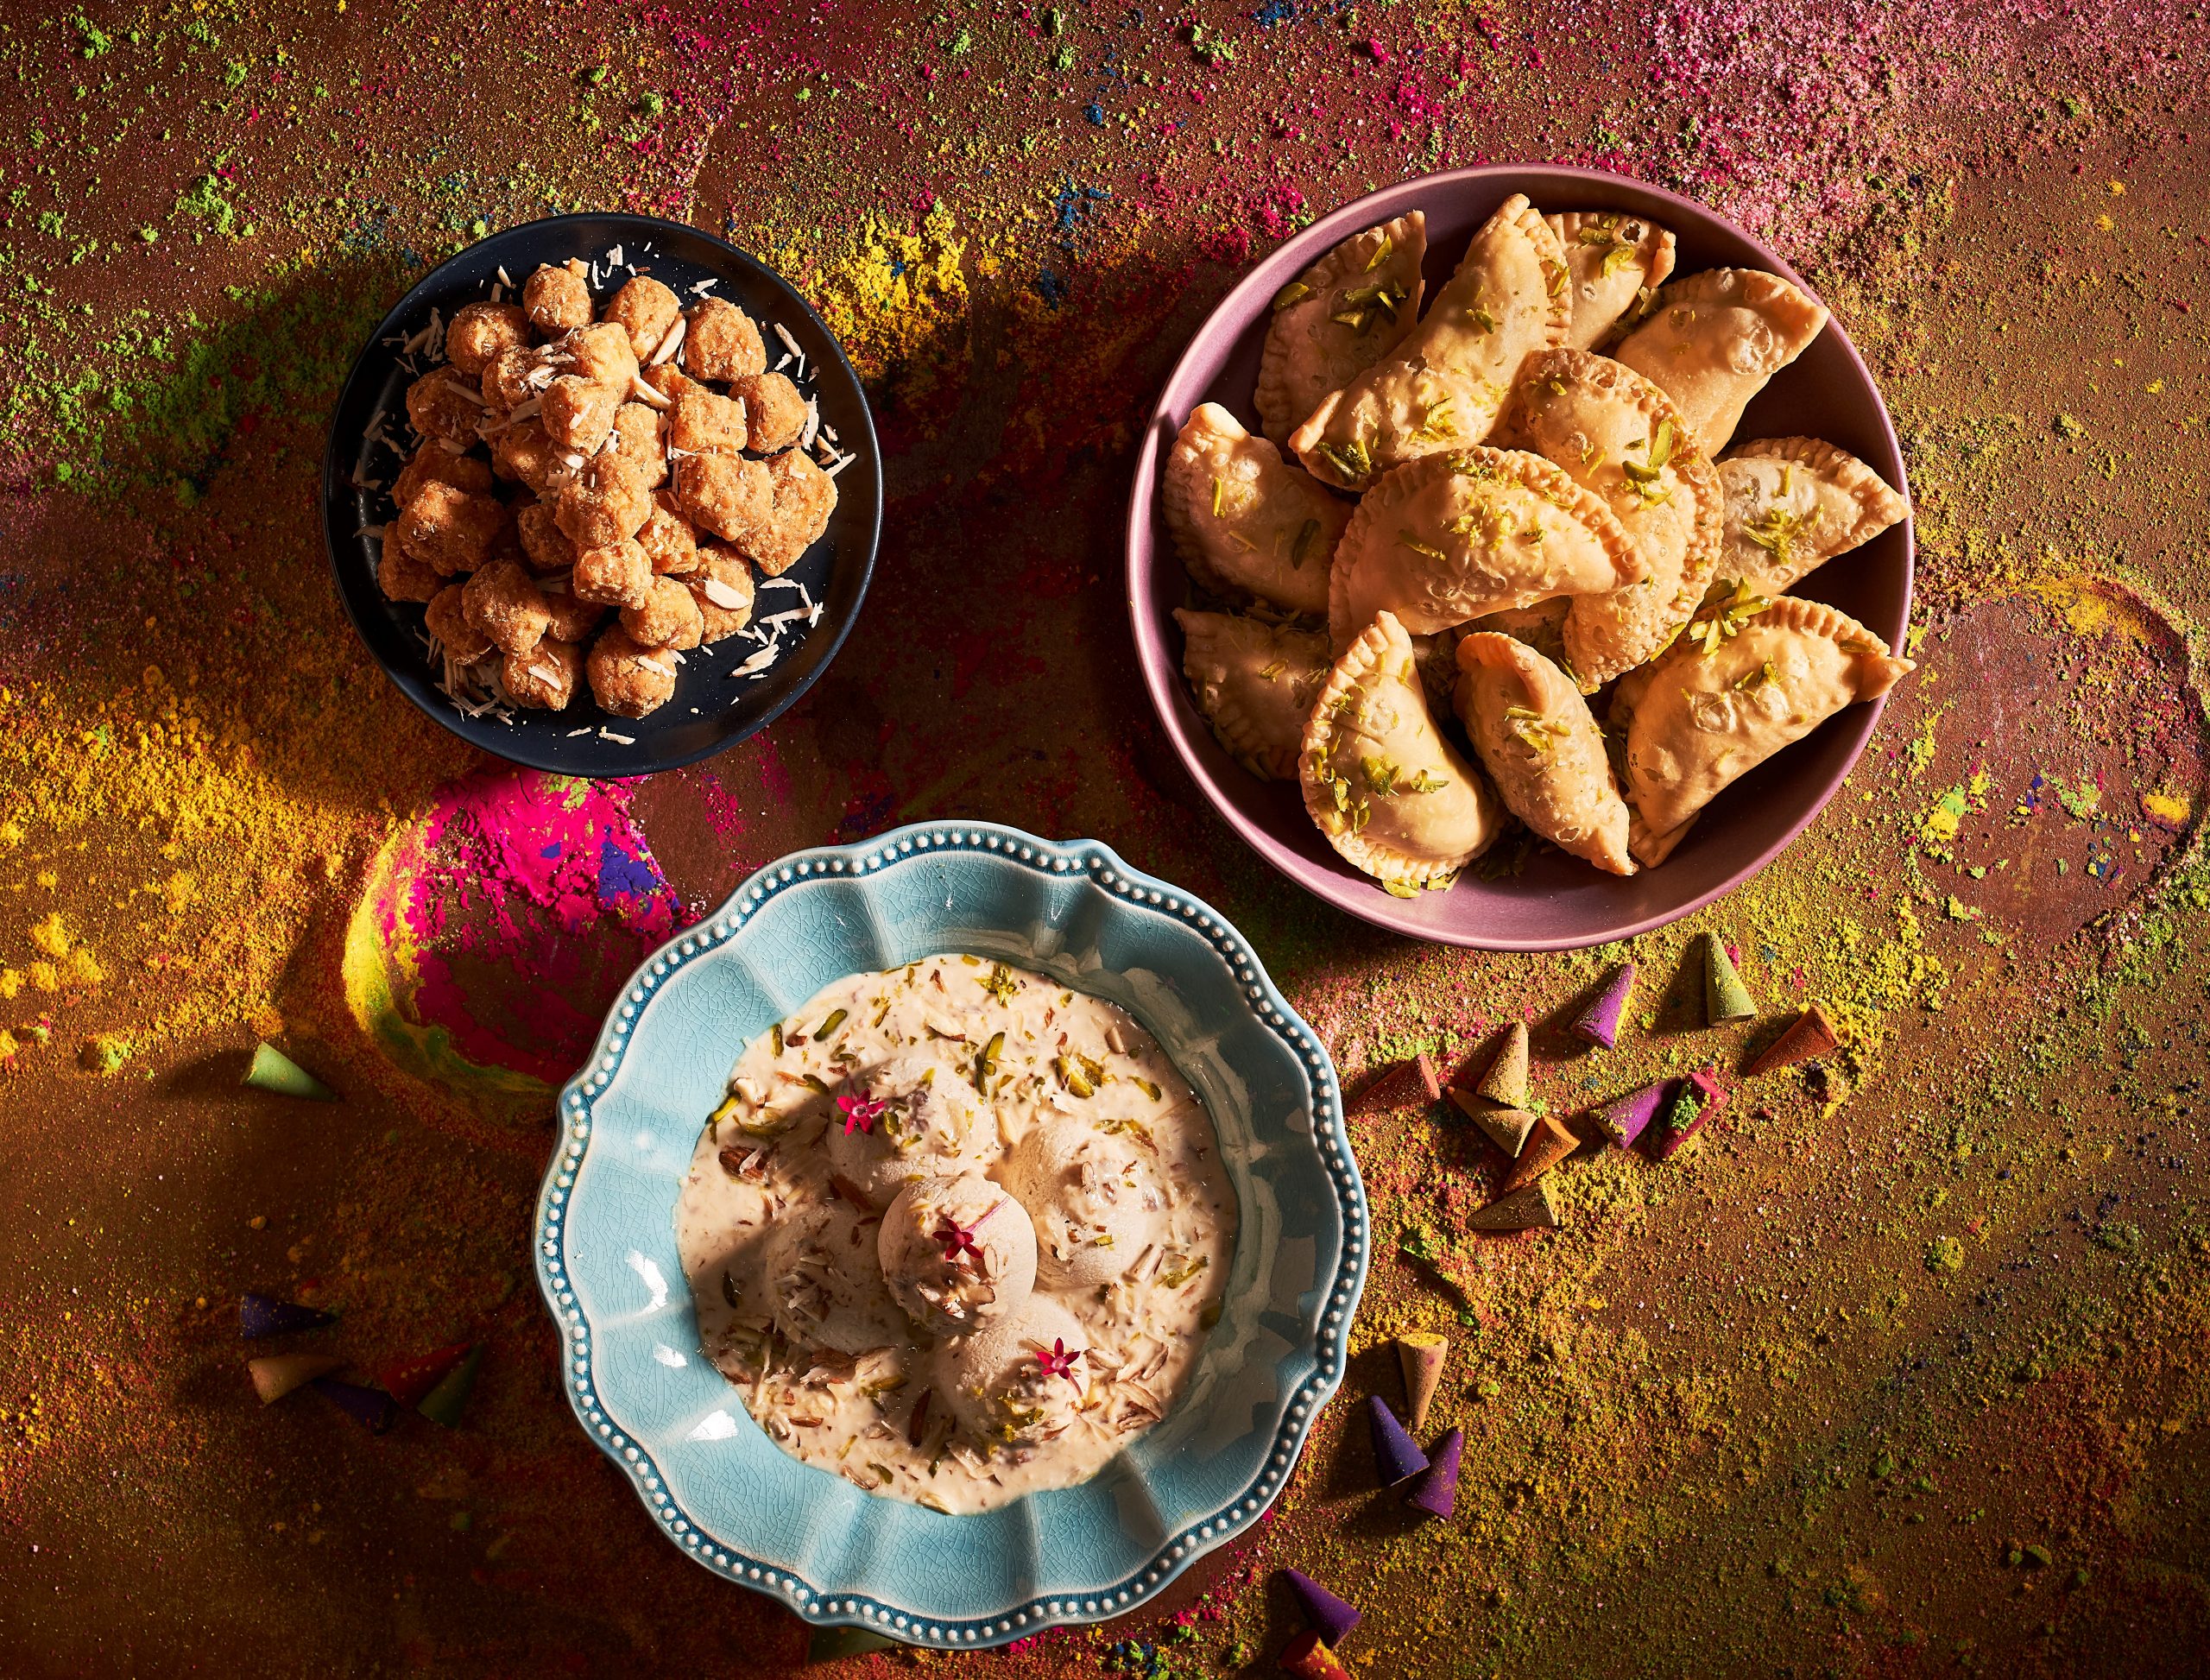 Tiffin Room- The Flavours of Holi 2022, Desserts